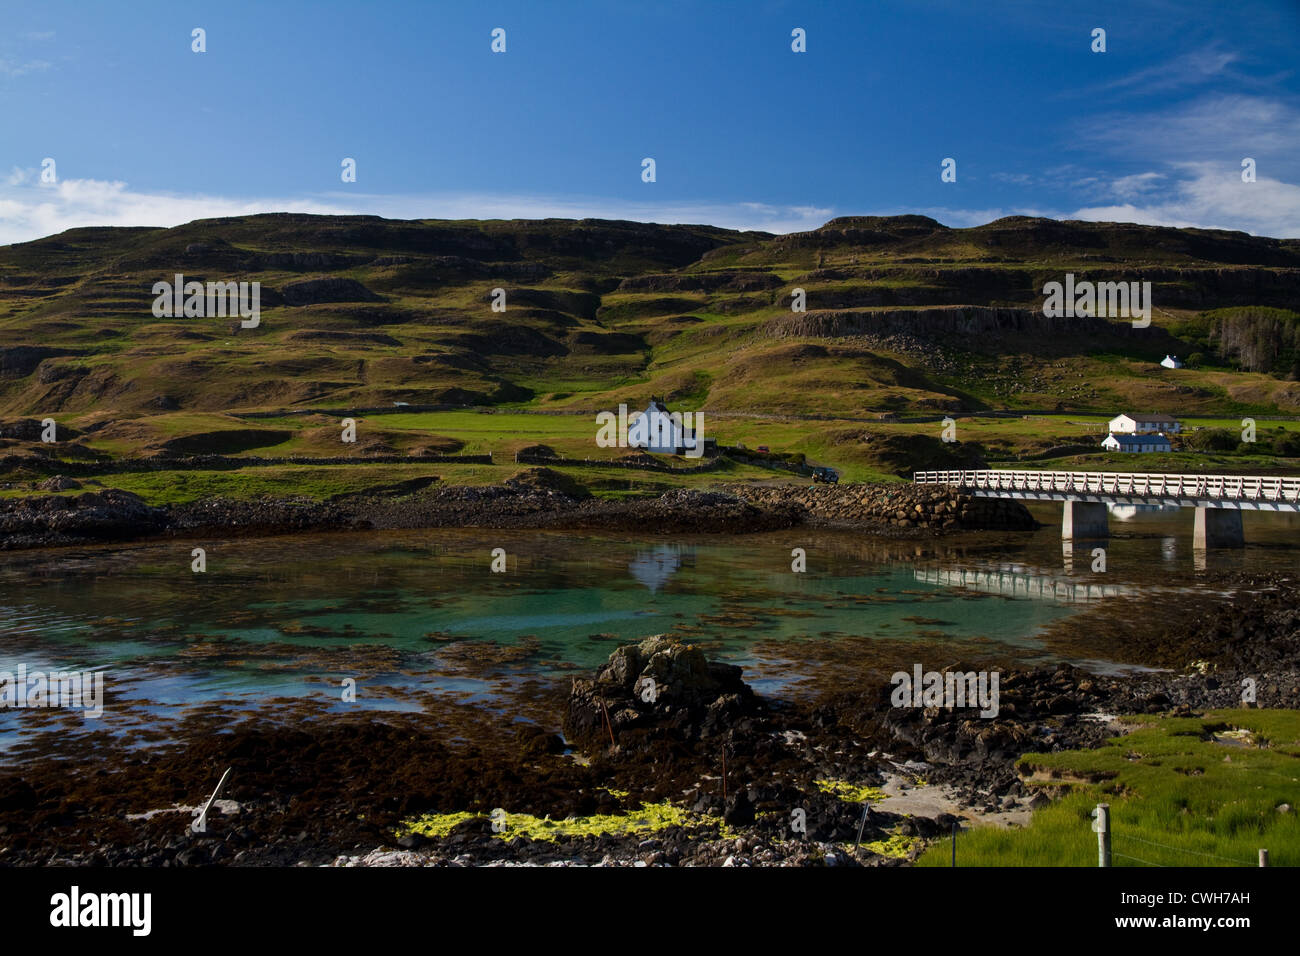 The bridge connecting Sanday and Canna, Small Isles, Scotland, with Canna's basalt terraces in the background Stock Photo